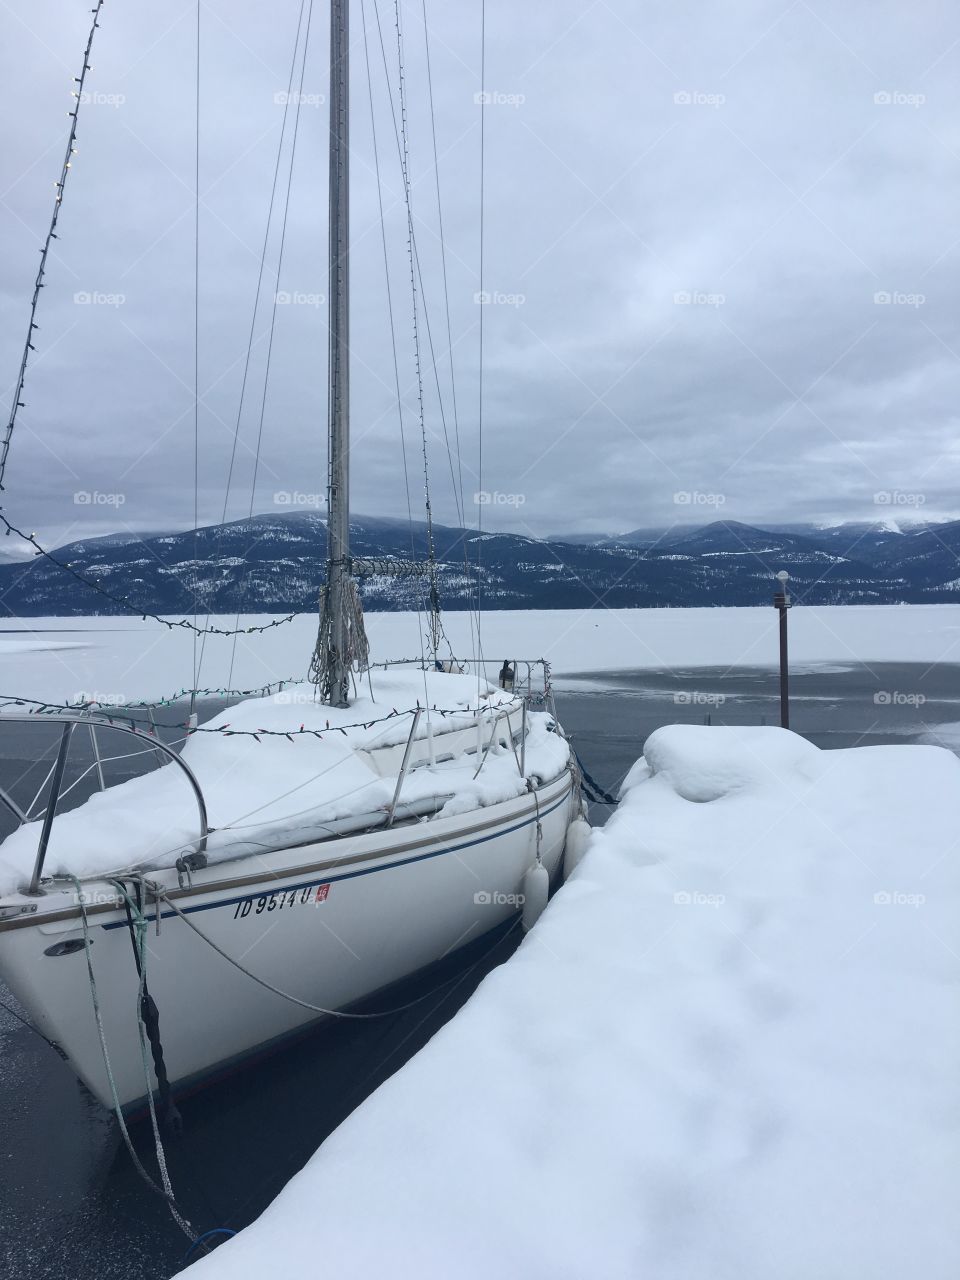 Sail boat covered in snow on lake